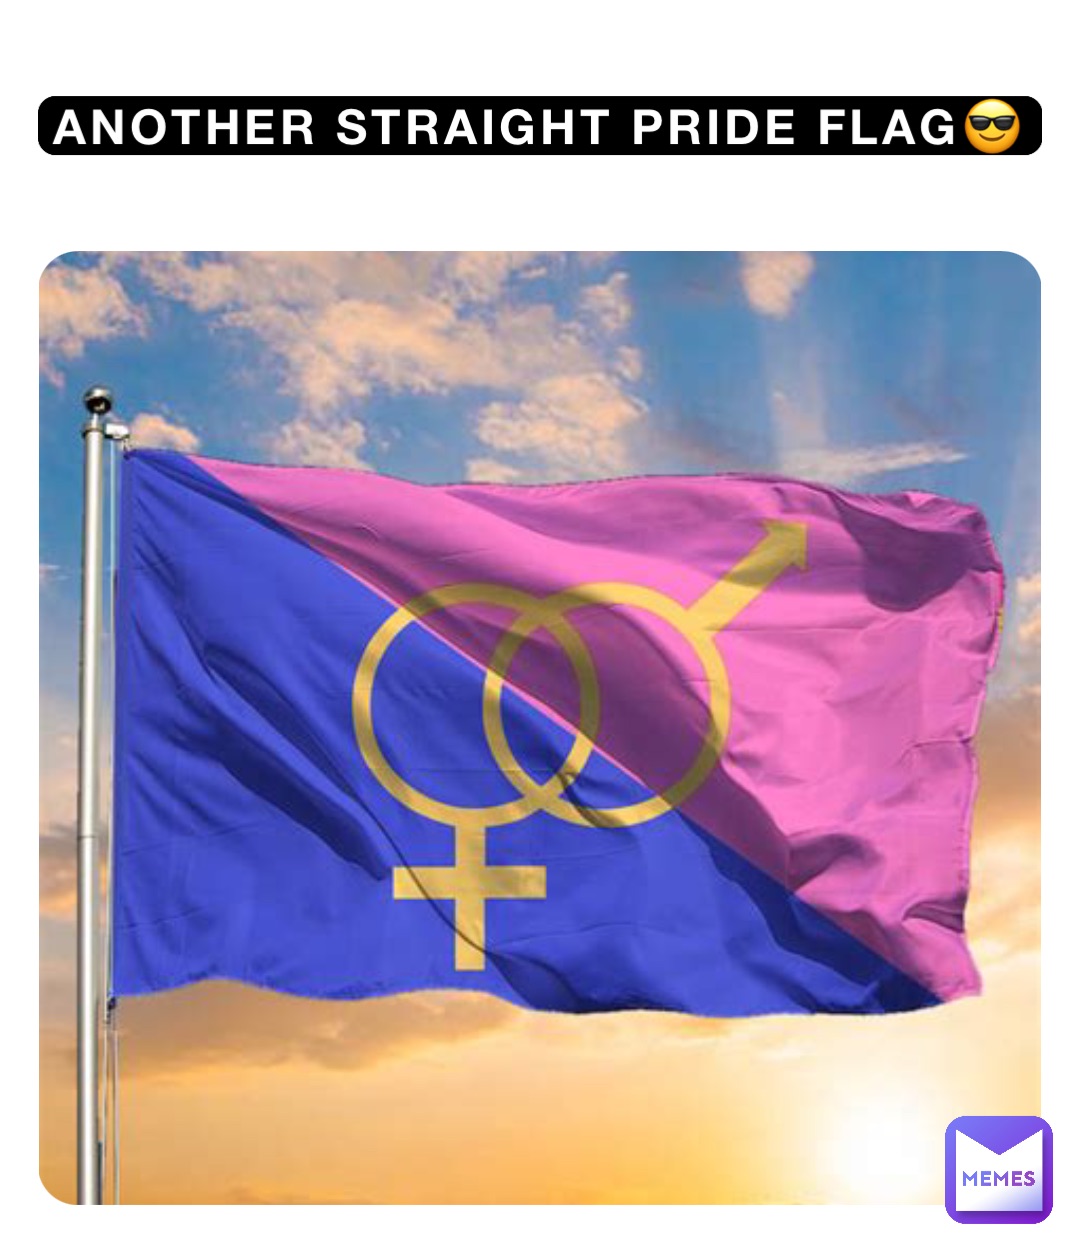 Another Straight Pride Flag😎